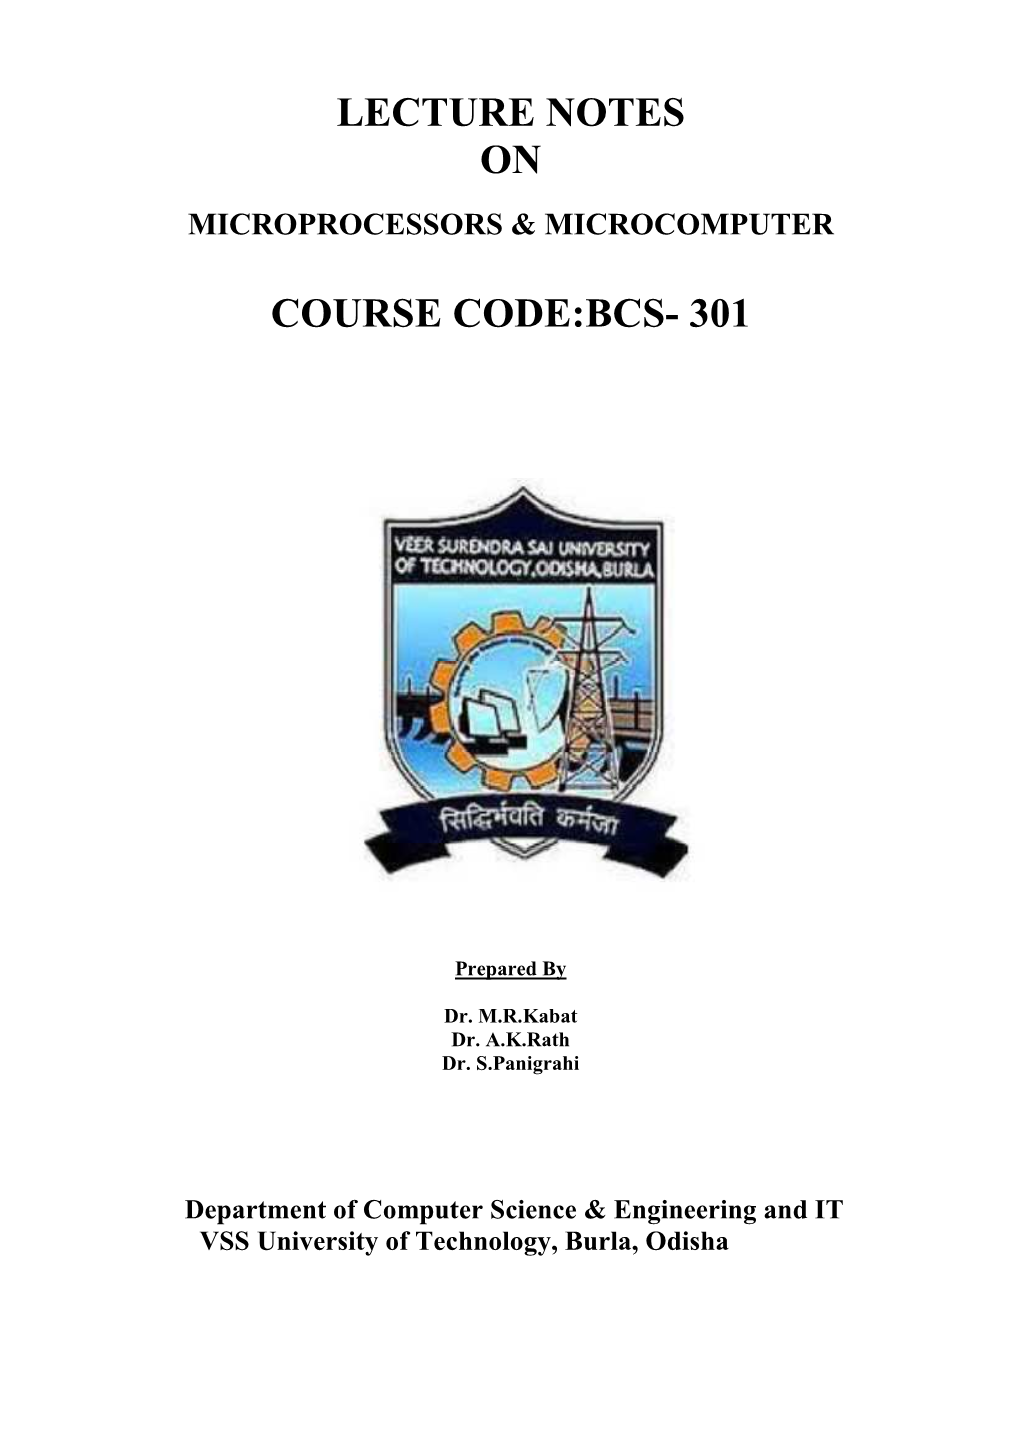 Lecture Notes on Course Code:Bcs